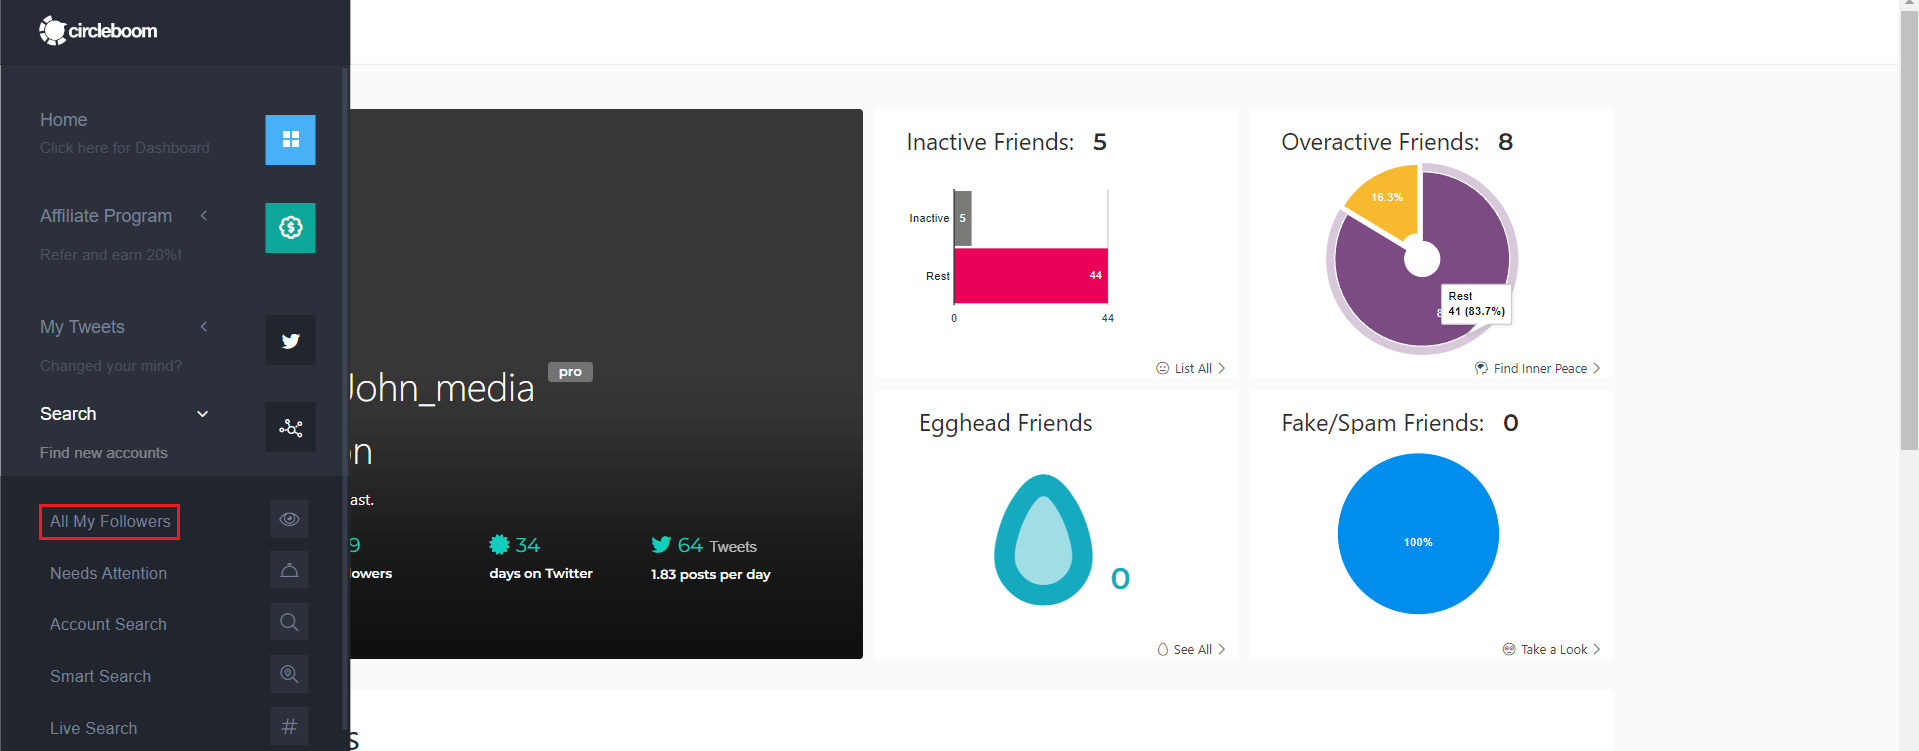 Circleboom dashboard gets you to see your follower list